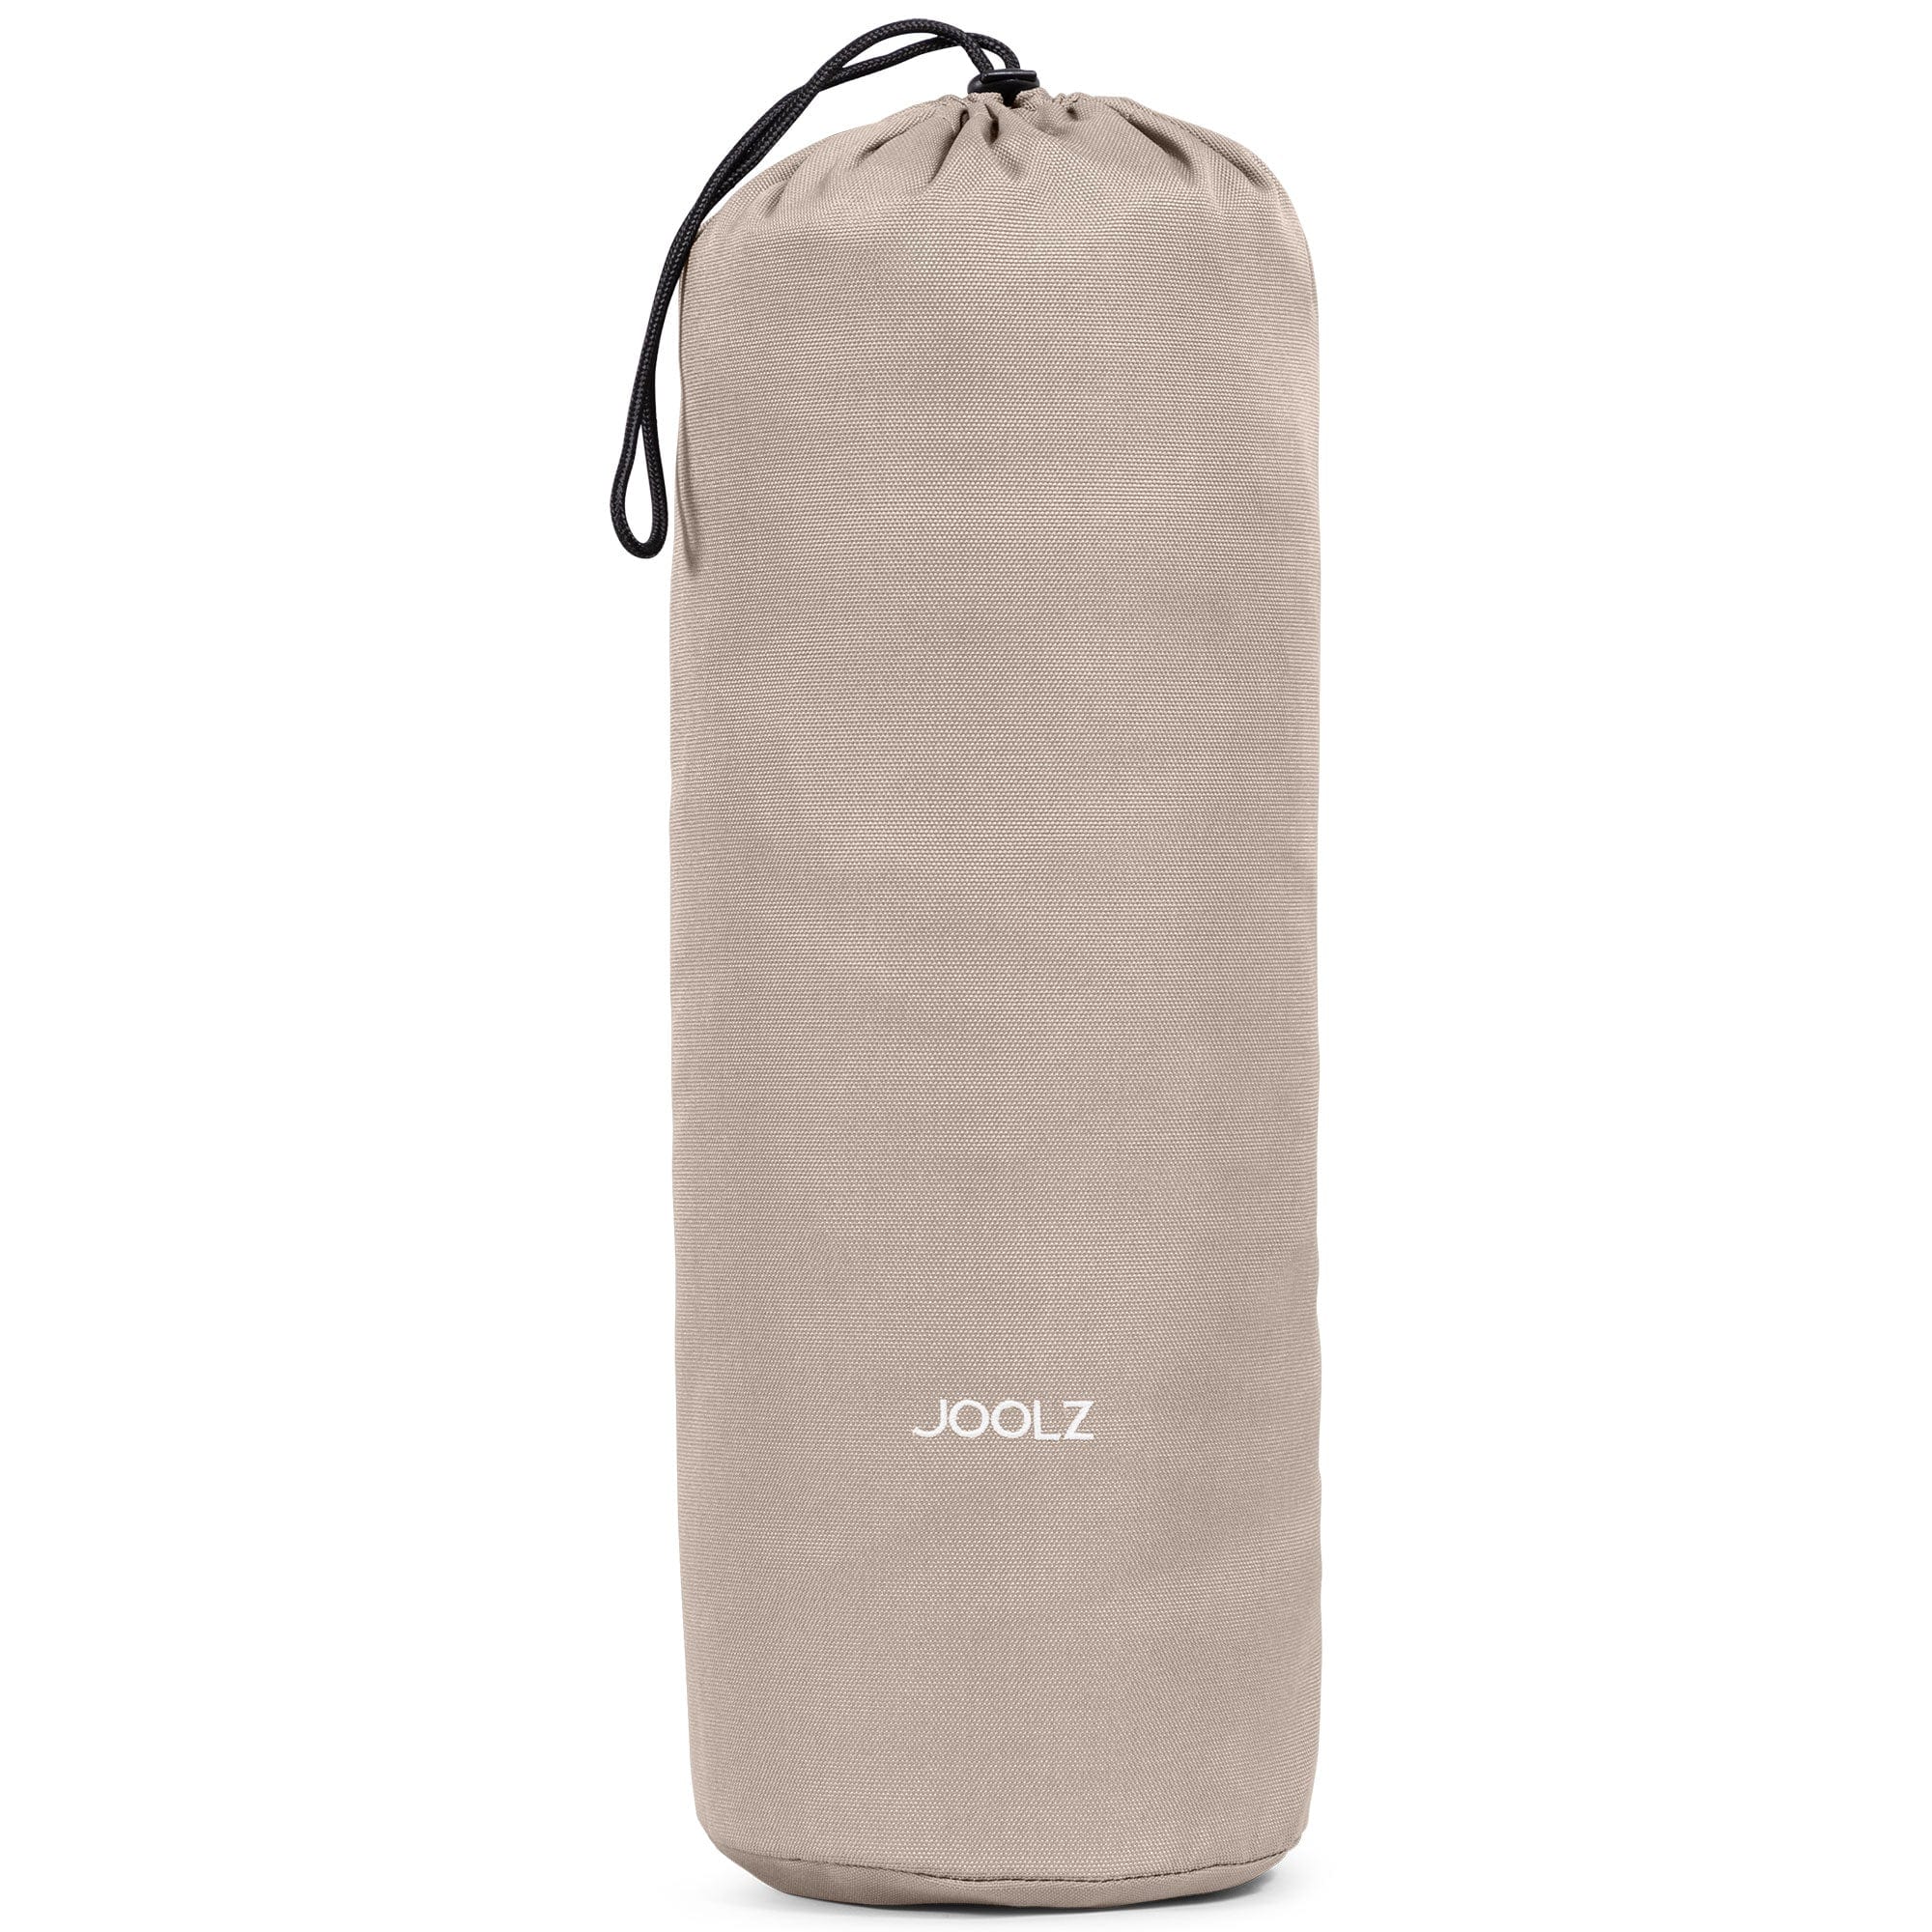 Joolz Universal Footmuff in Sandy Taupe Footmuffs & Liners 560213 8715688088739